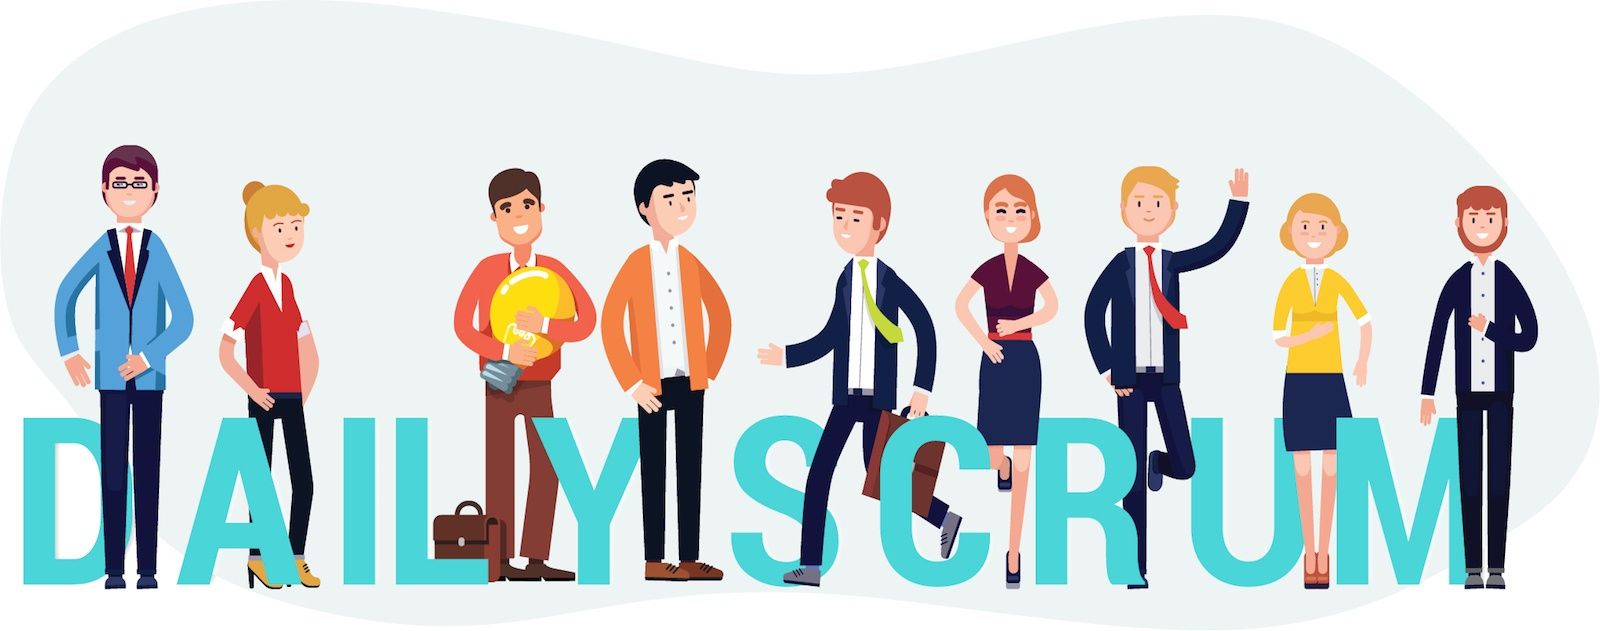 Myth: Scrum Master Leads the Daily Scrum